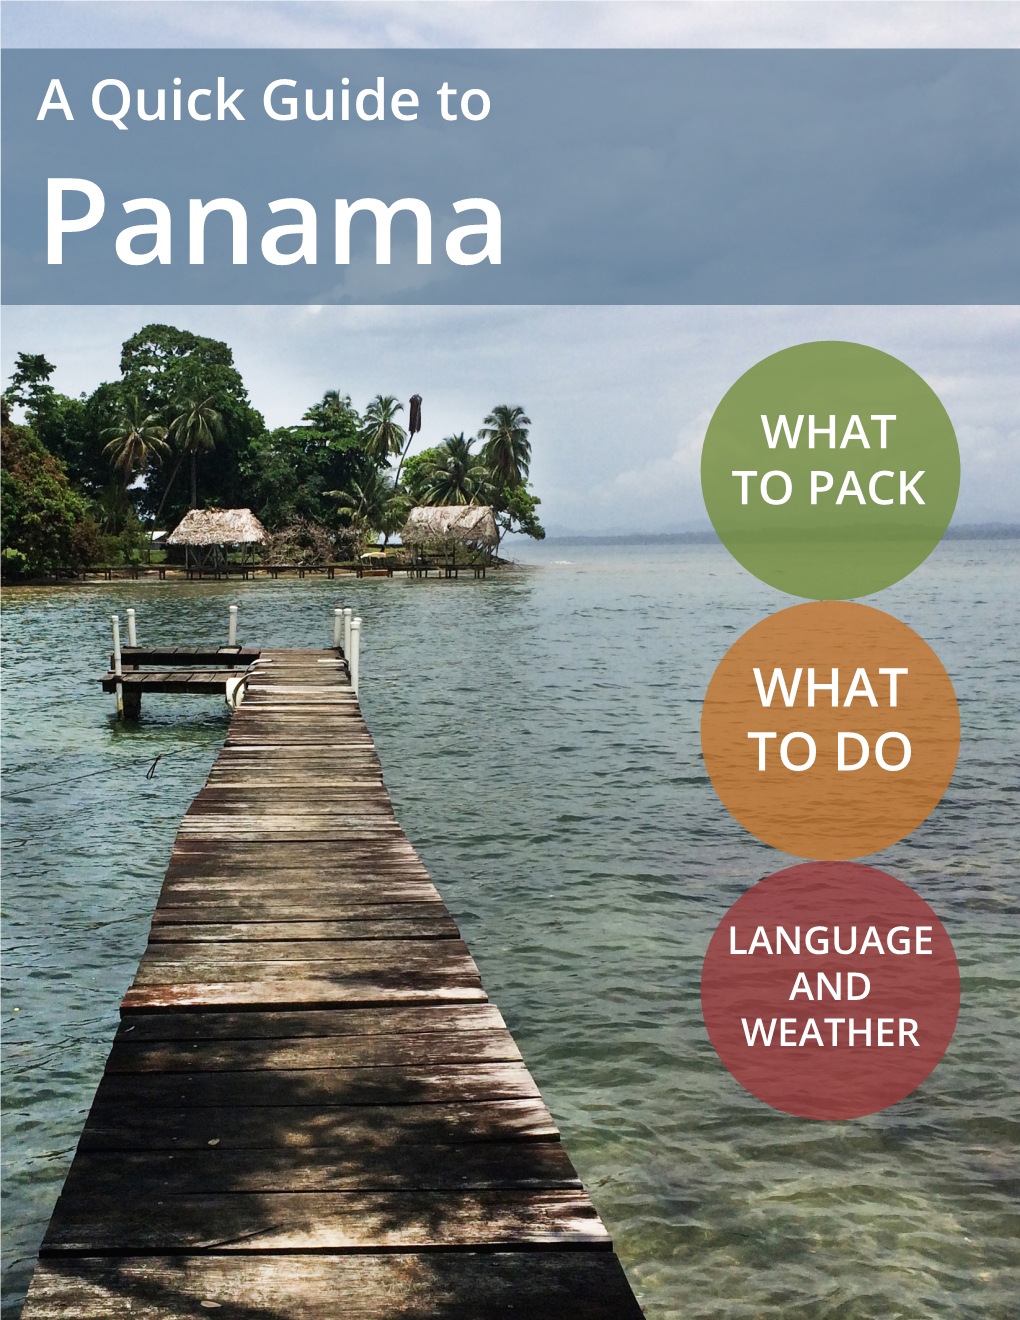 A Quick Guide to Panama